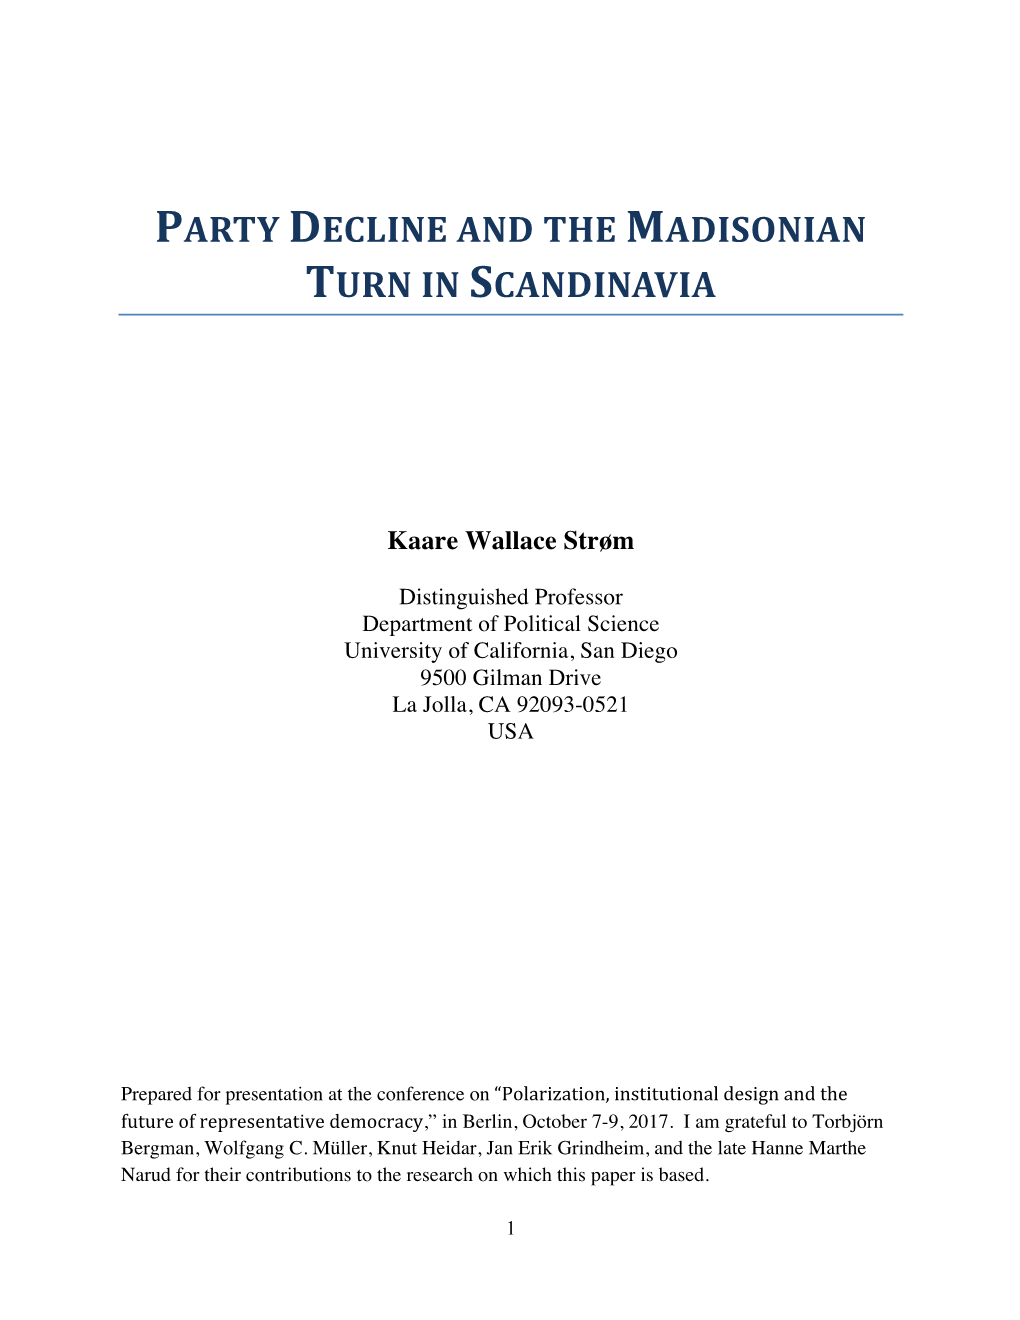 Party Decline and the Madisonian Turn in Scandinavia